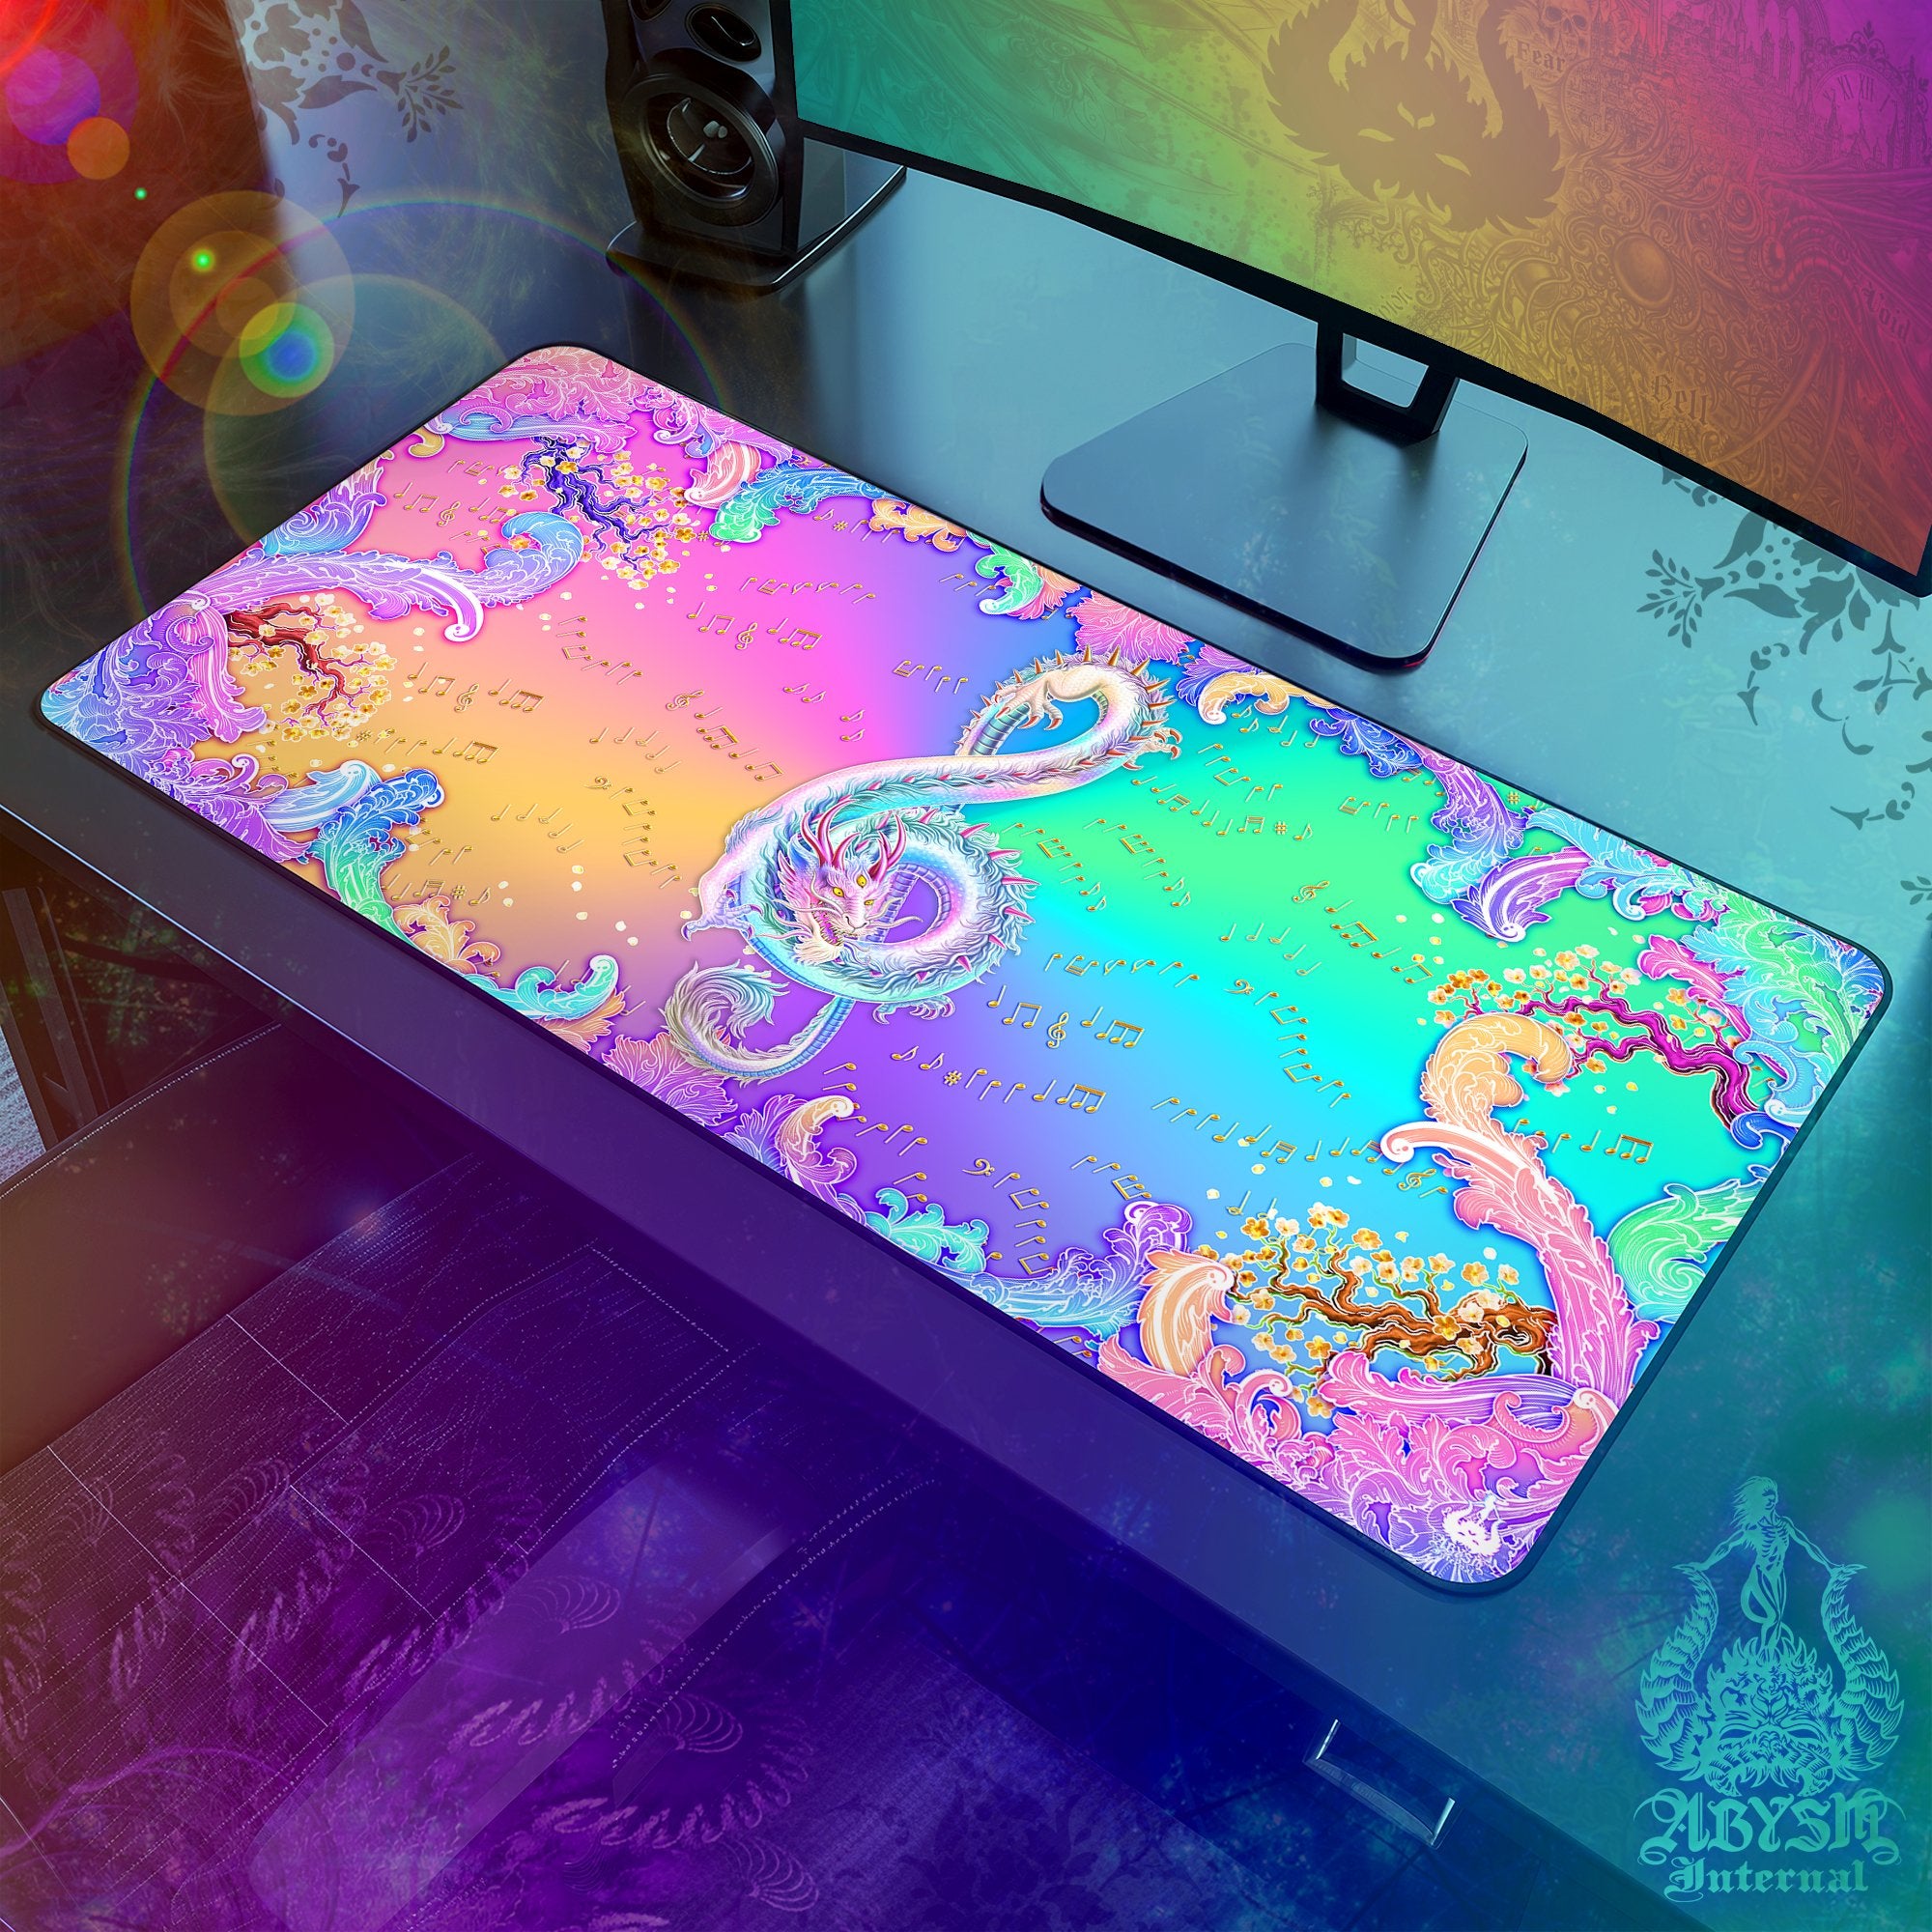 Psychedelic Dragon Gaming Mouse Pad, Music Desk Mat, Trippy Pastel Workpad, Girl Gamer Table Protector Cover, Treble Clef Asian Art Print - 2 Options - Abysm Internal